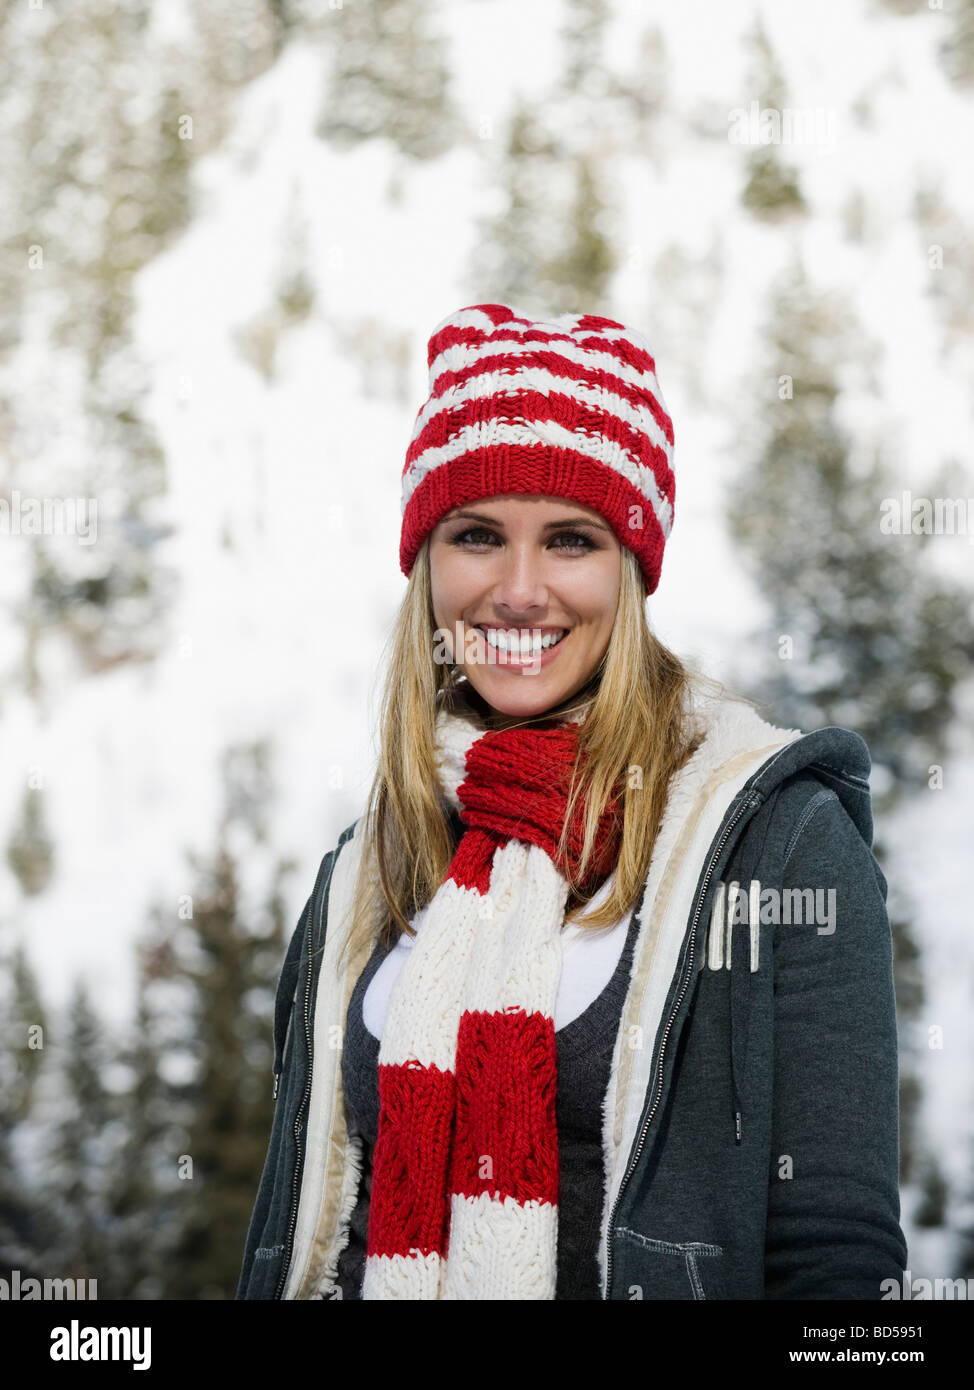 A woman outdoors in snowy surroundings Stock Photo